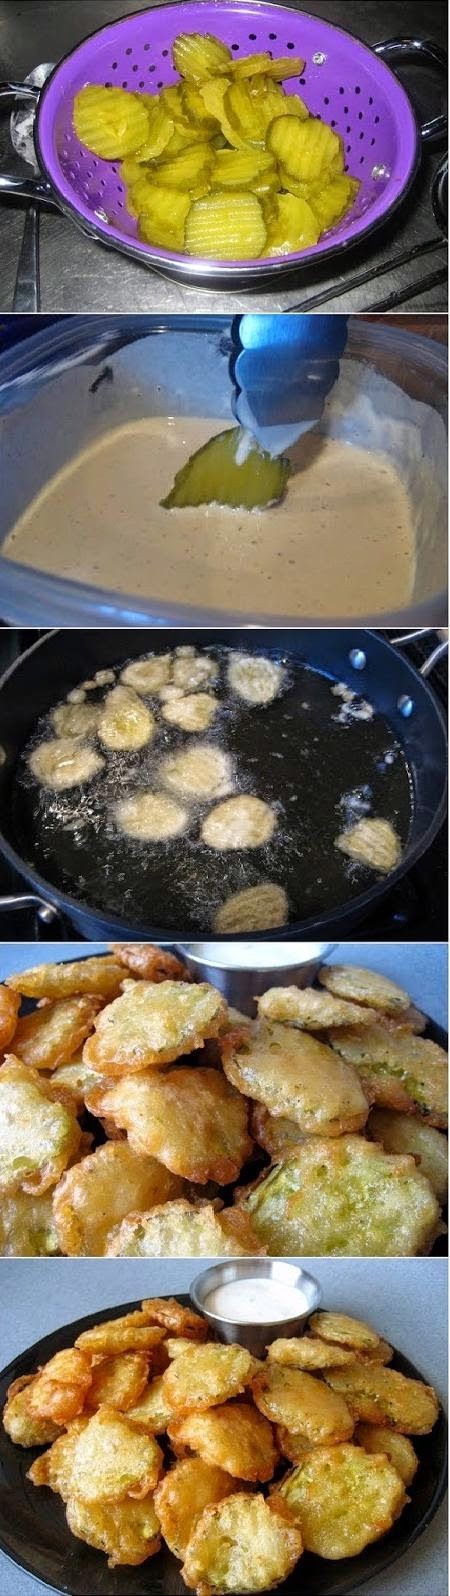 Food & Drink: Fried Pickles...delicious. I, ge...